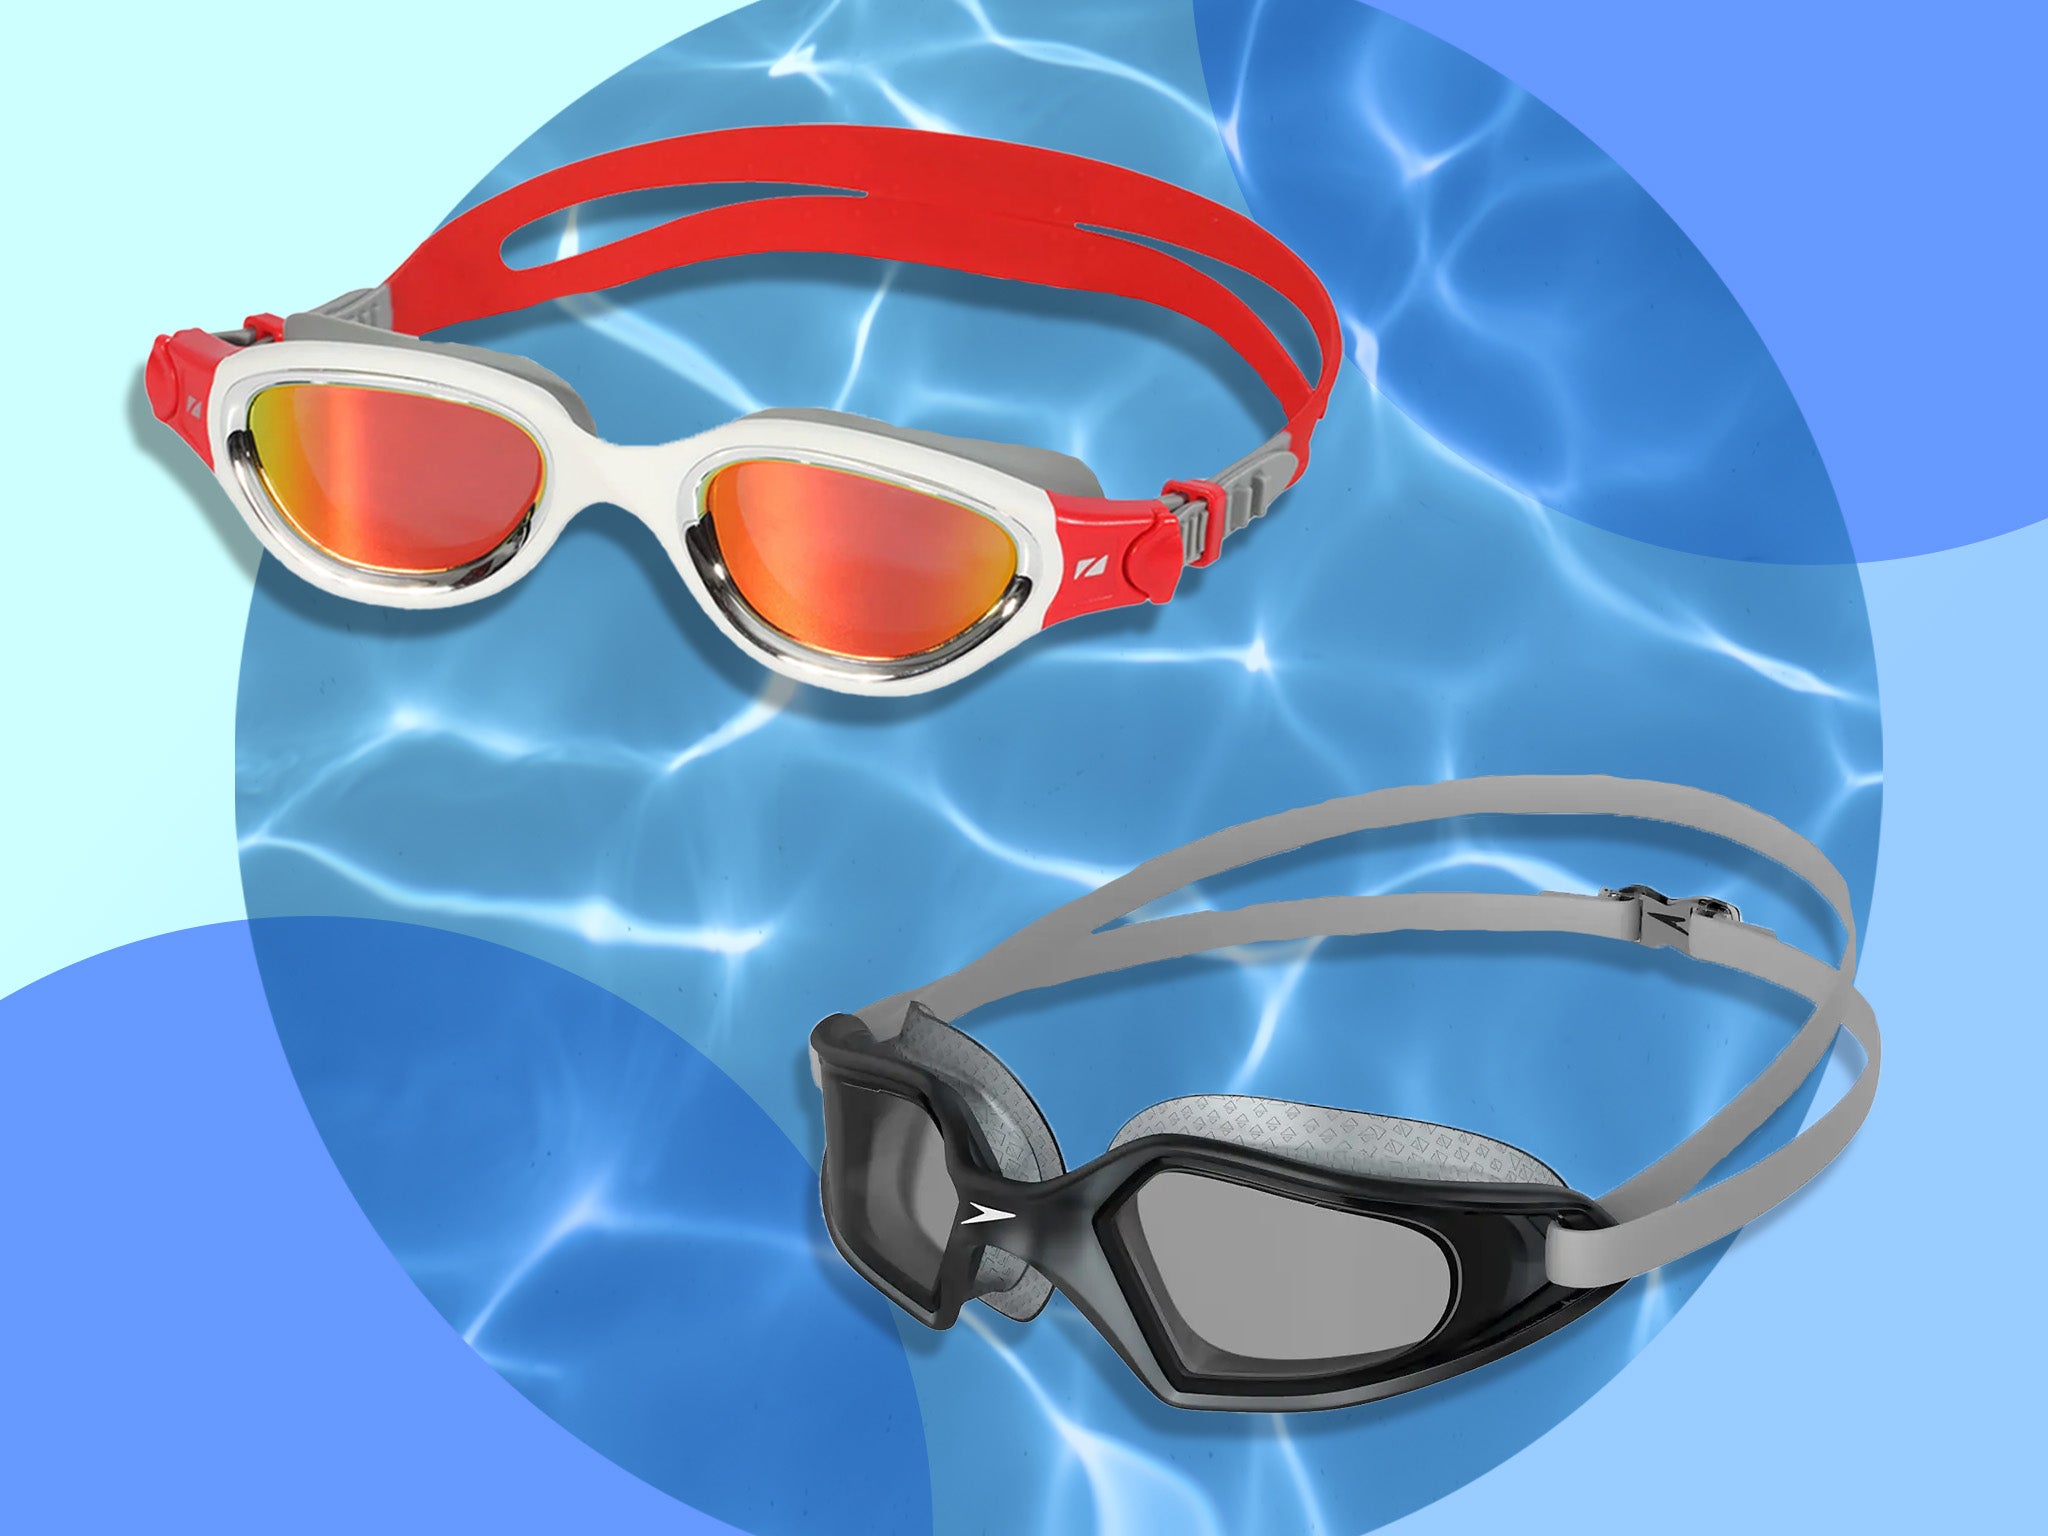 New Adjustable Anti-Fog Swimming Goggles Glasses Earbuds Nose Clip Adult Kids UK 